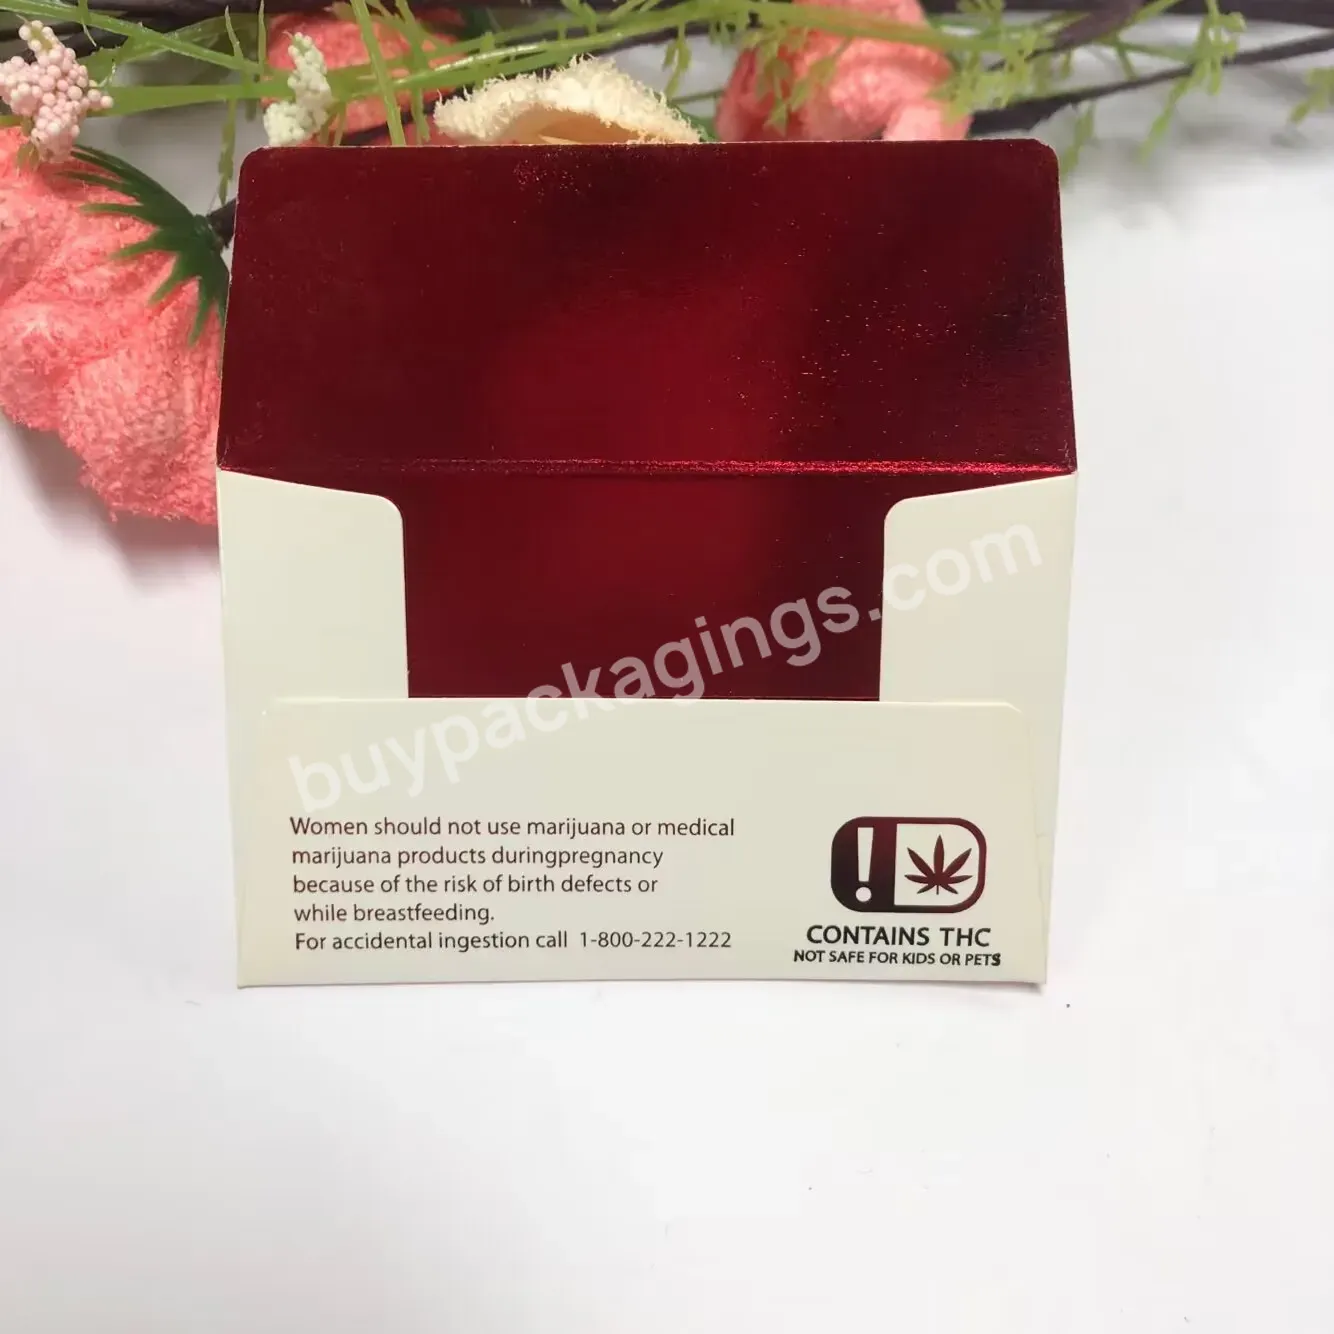 Customized Logo Printed White Scarf Envelope Packaging Clothing Packaging Envelope Bags - Buy Packaging Envelope Bags,A4 Manila Envelope,Kraft Envelope With Button And String Closure.